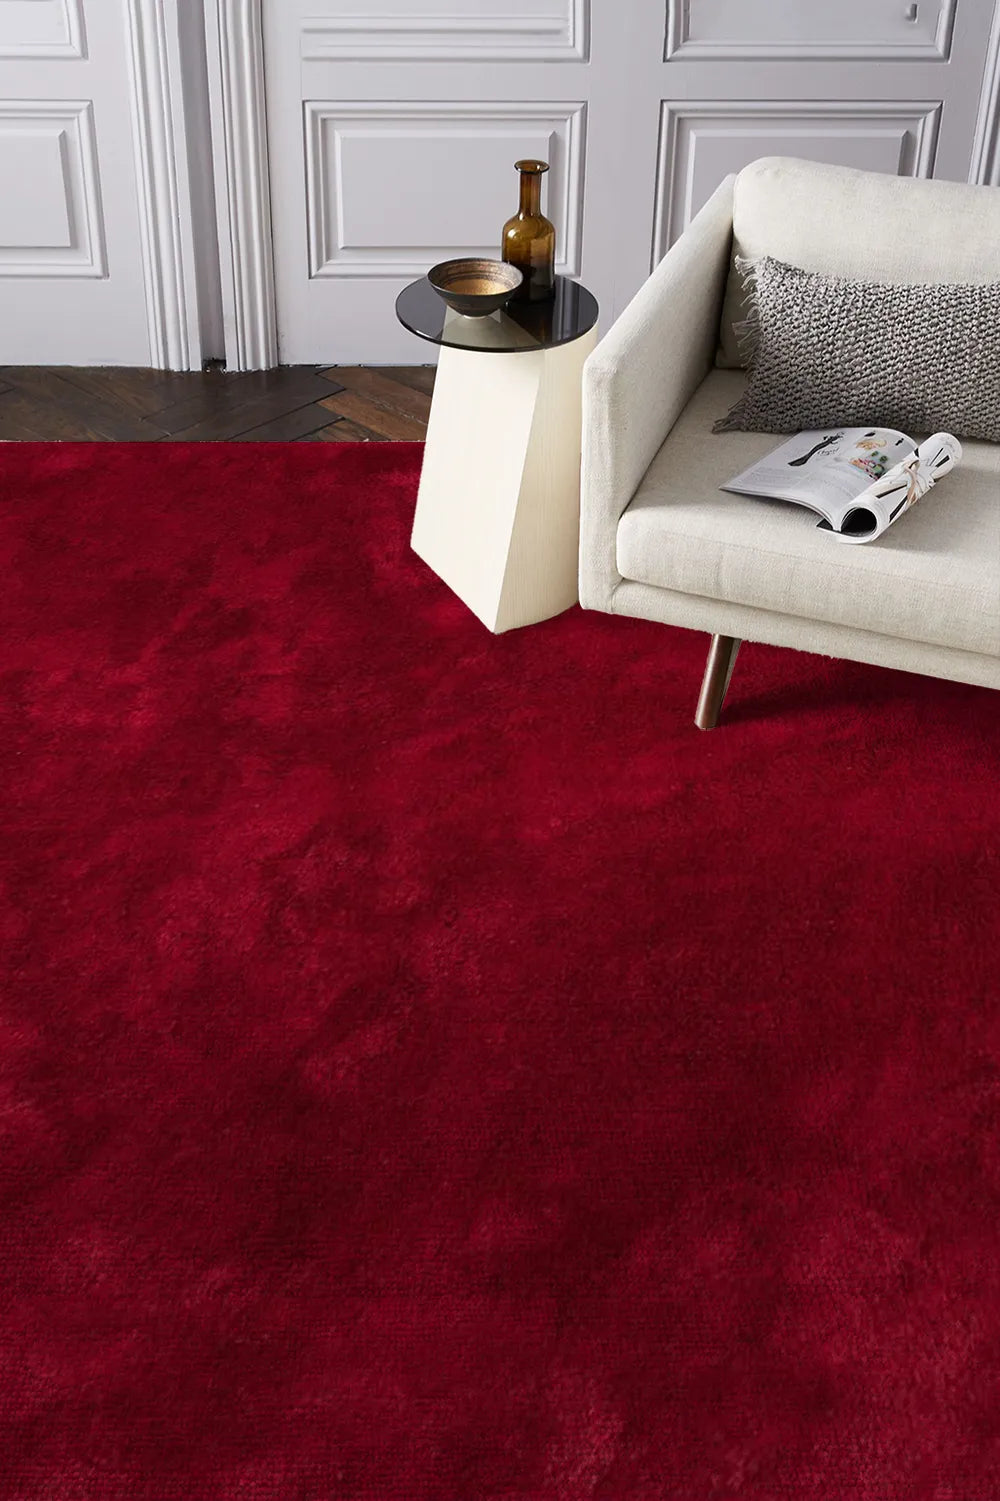 Lucy Microfibre Rug - 109 Red